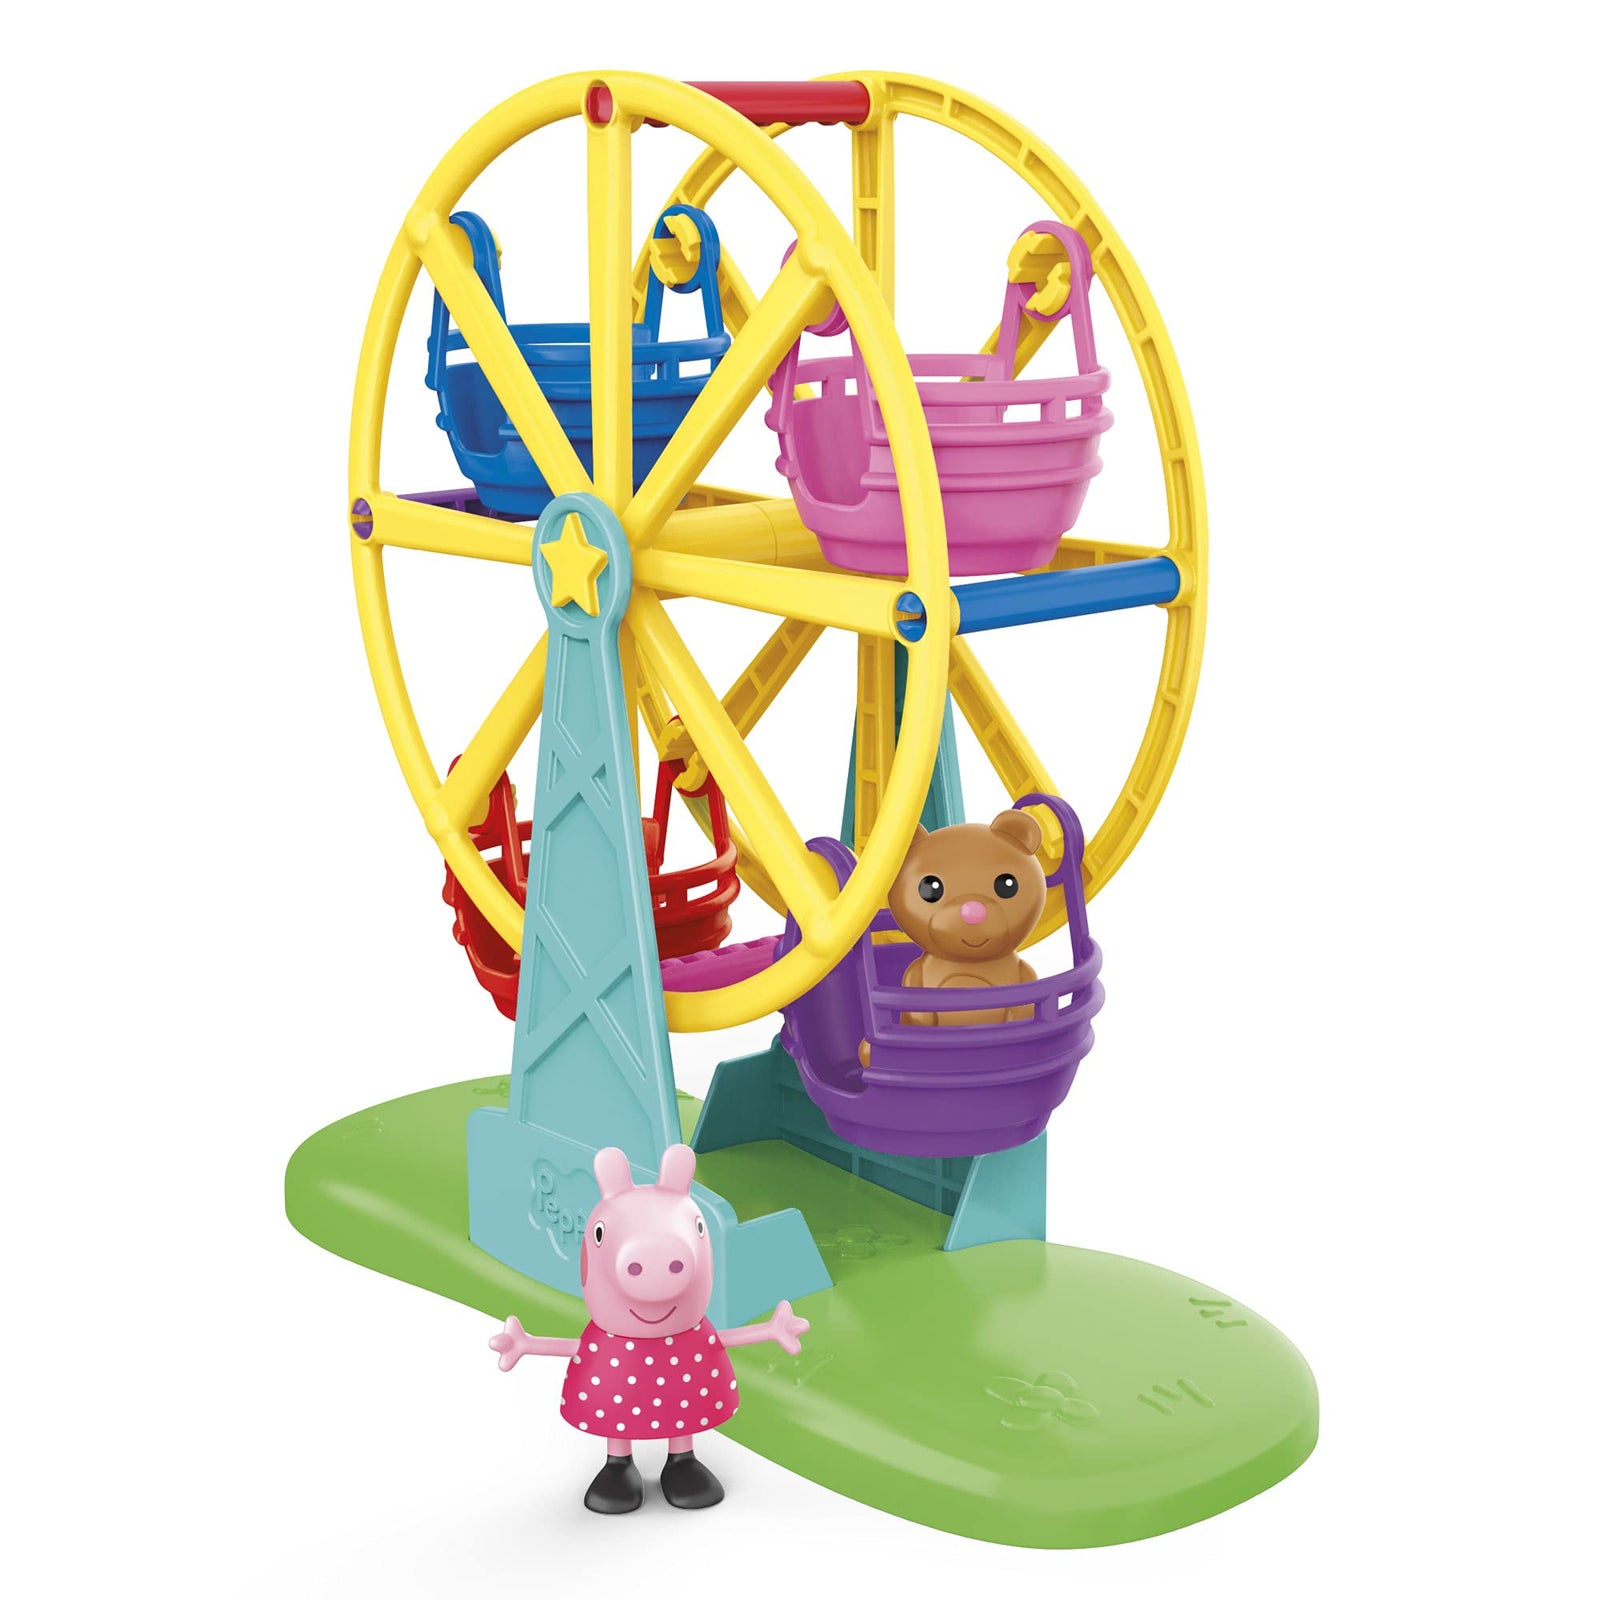 Hasbro Peppa Pig Peppa’s Adventures Peppa’s Ferris Wheel Playset Preschool Toy, with Peppa Pig Figure and Accessory for Kids Ages 3 and Up